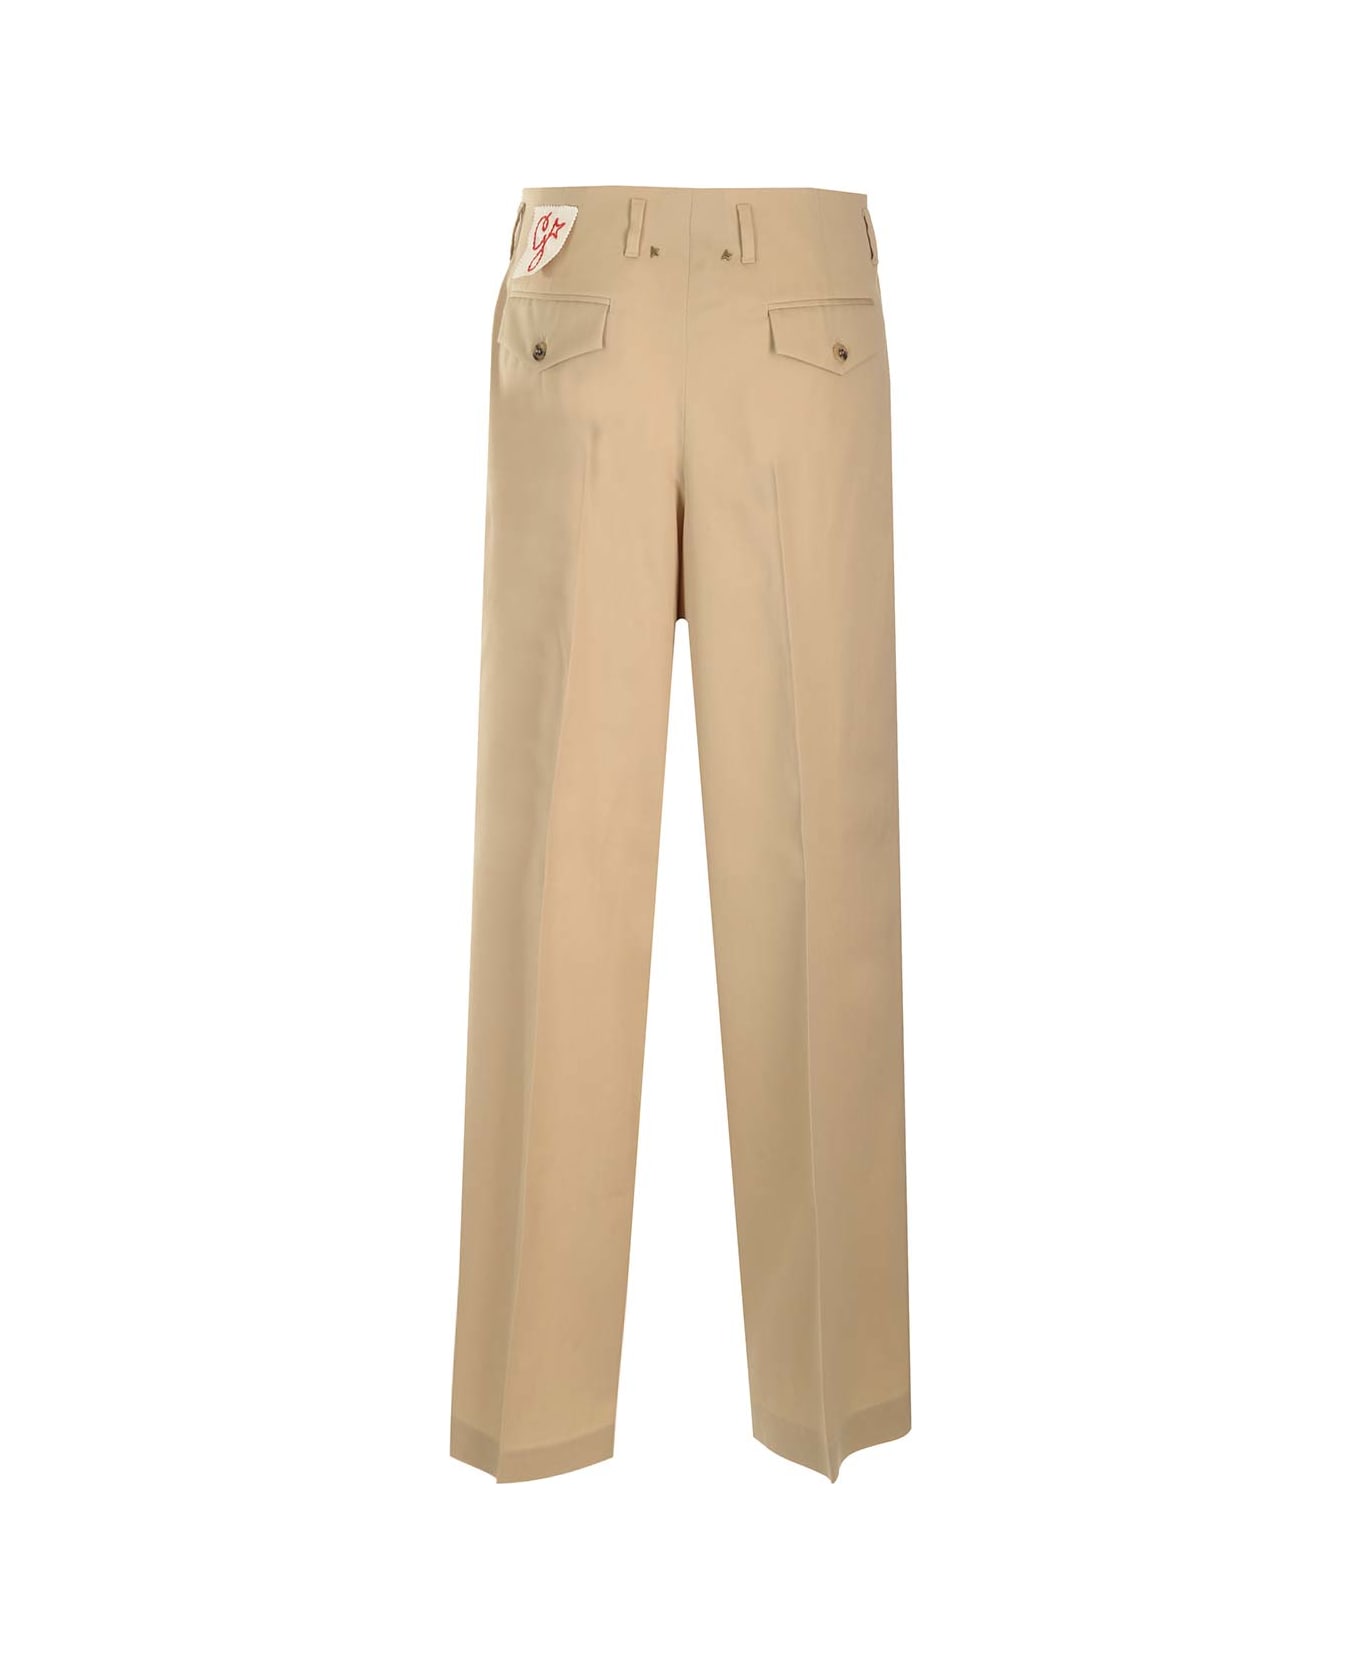 Golden Goose Wide Trousers With Pleats - BEIGE